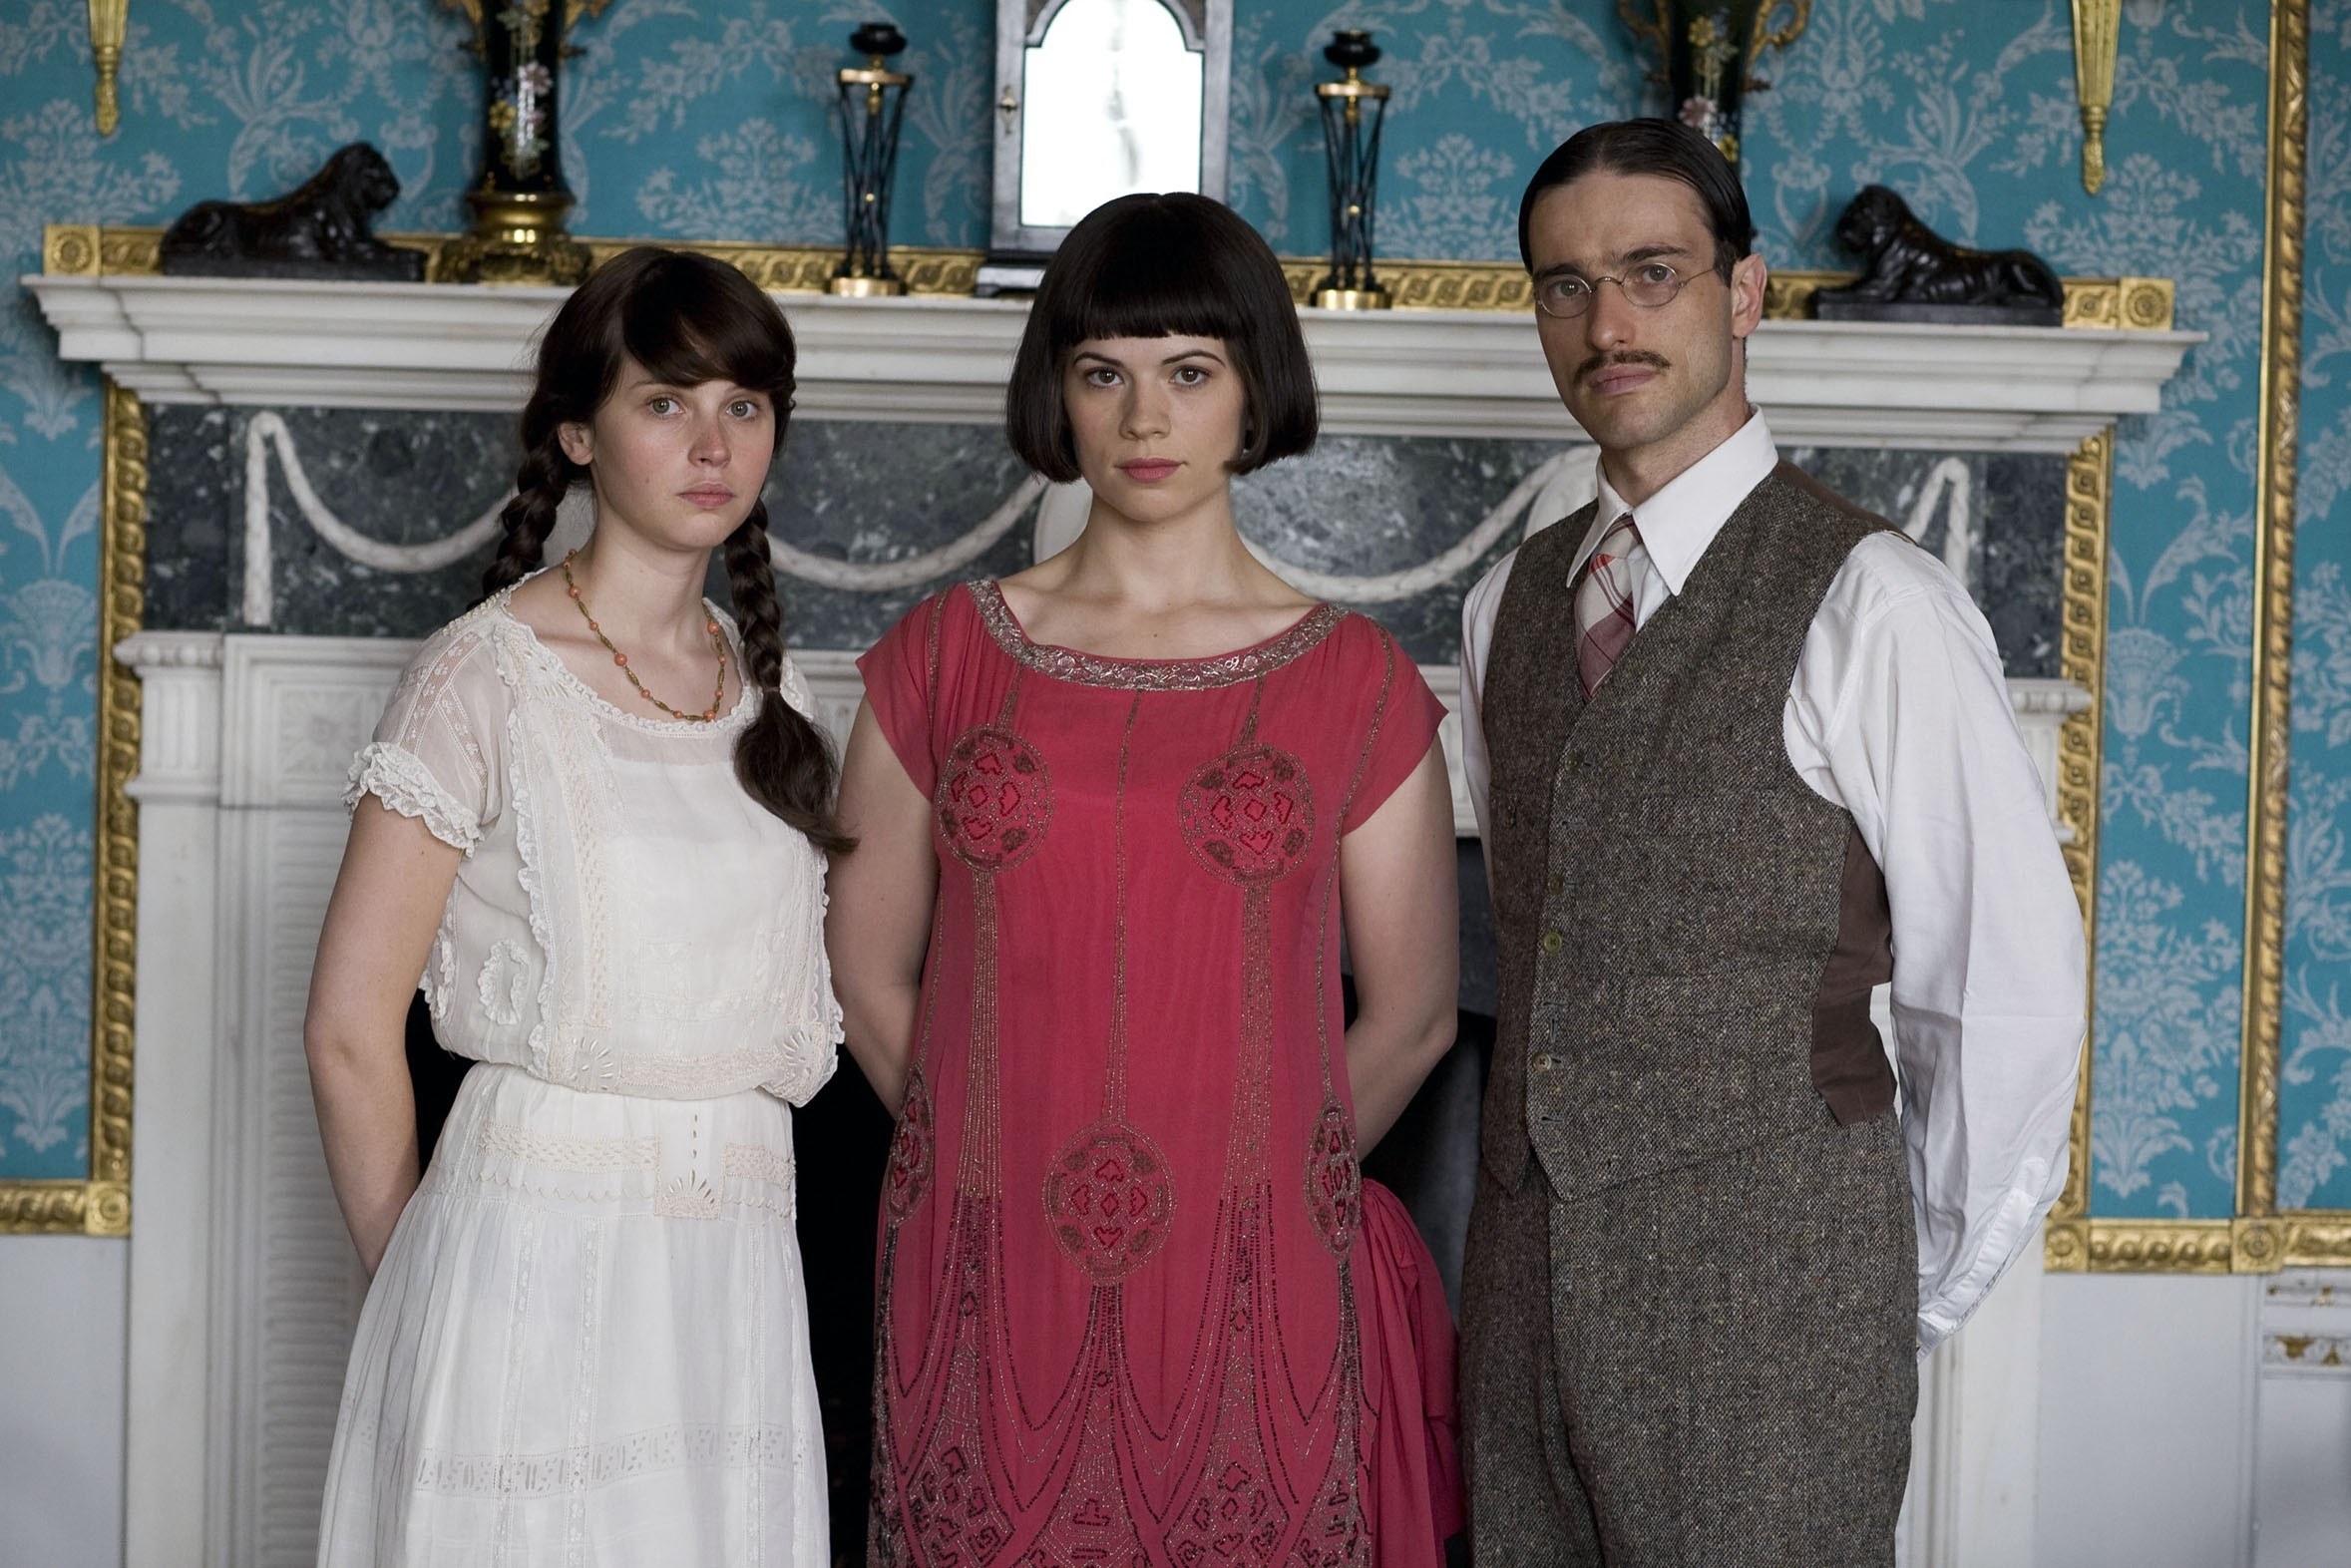 FELICITY JONES as Lady Cordelia Flyte HAYLEY ATWELL as Julia Flyte ED STOPPARD as Bridley Flyte BRIDESHEAD REVISITED